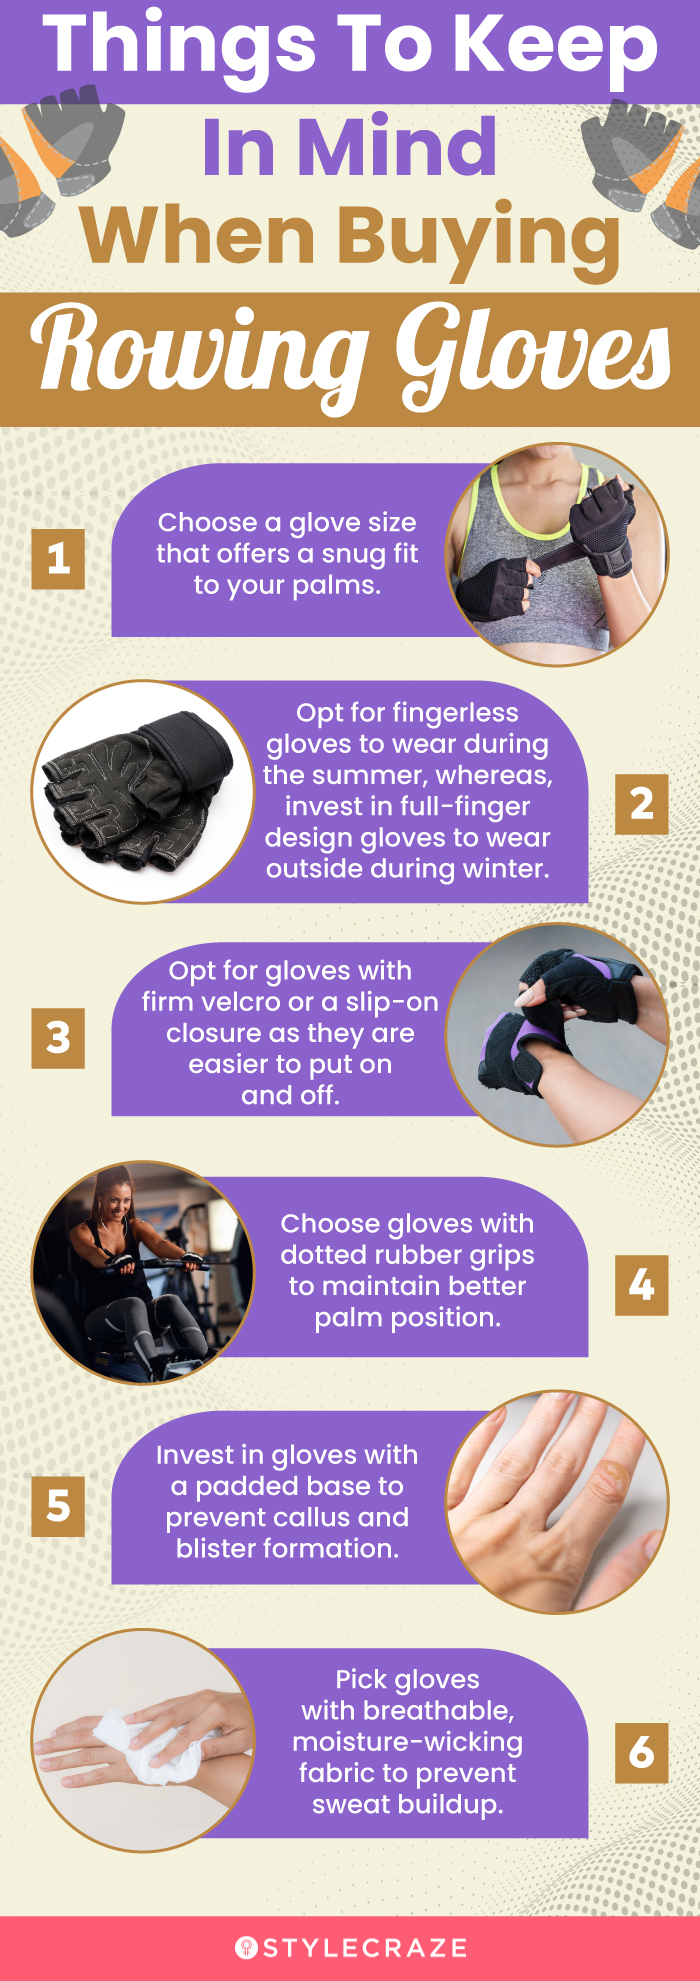 Things To Keep In Mind When Buying Rowing Gloves (infographic)